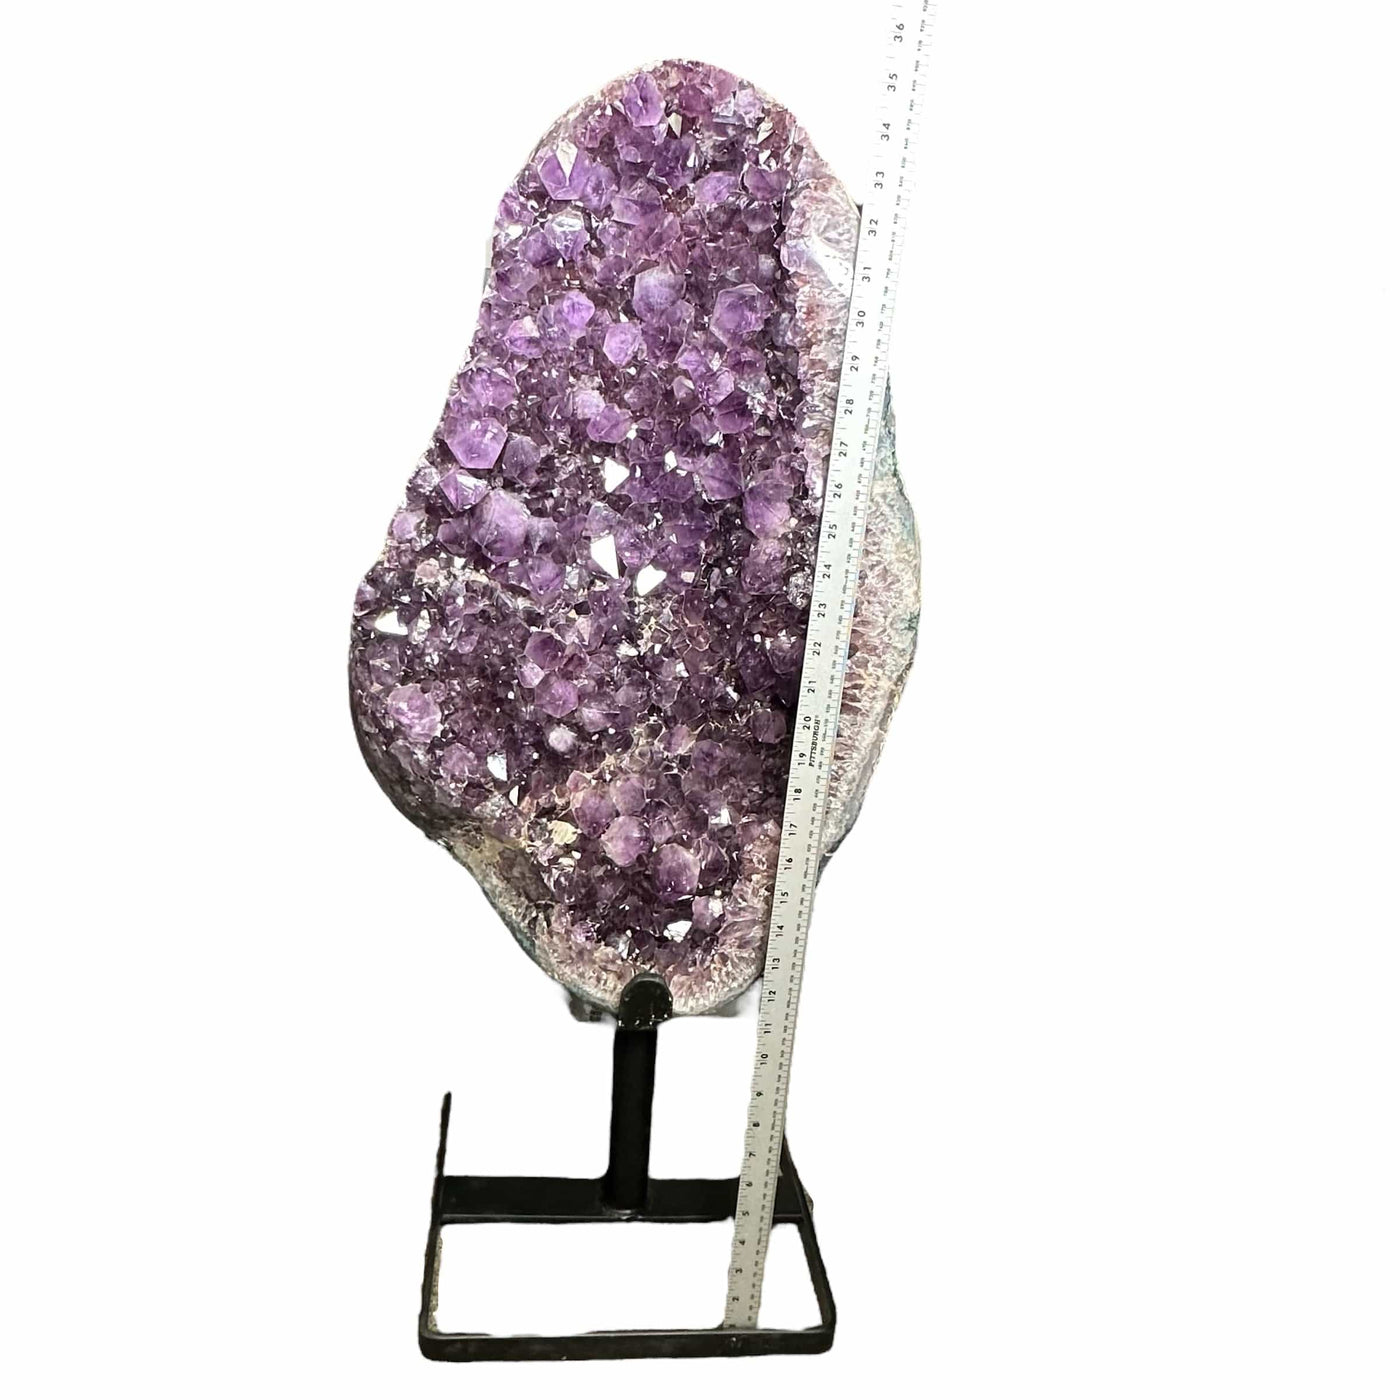 amethyst on stand next to a ruler for size reference 